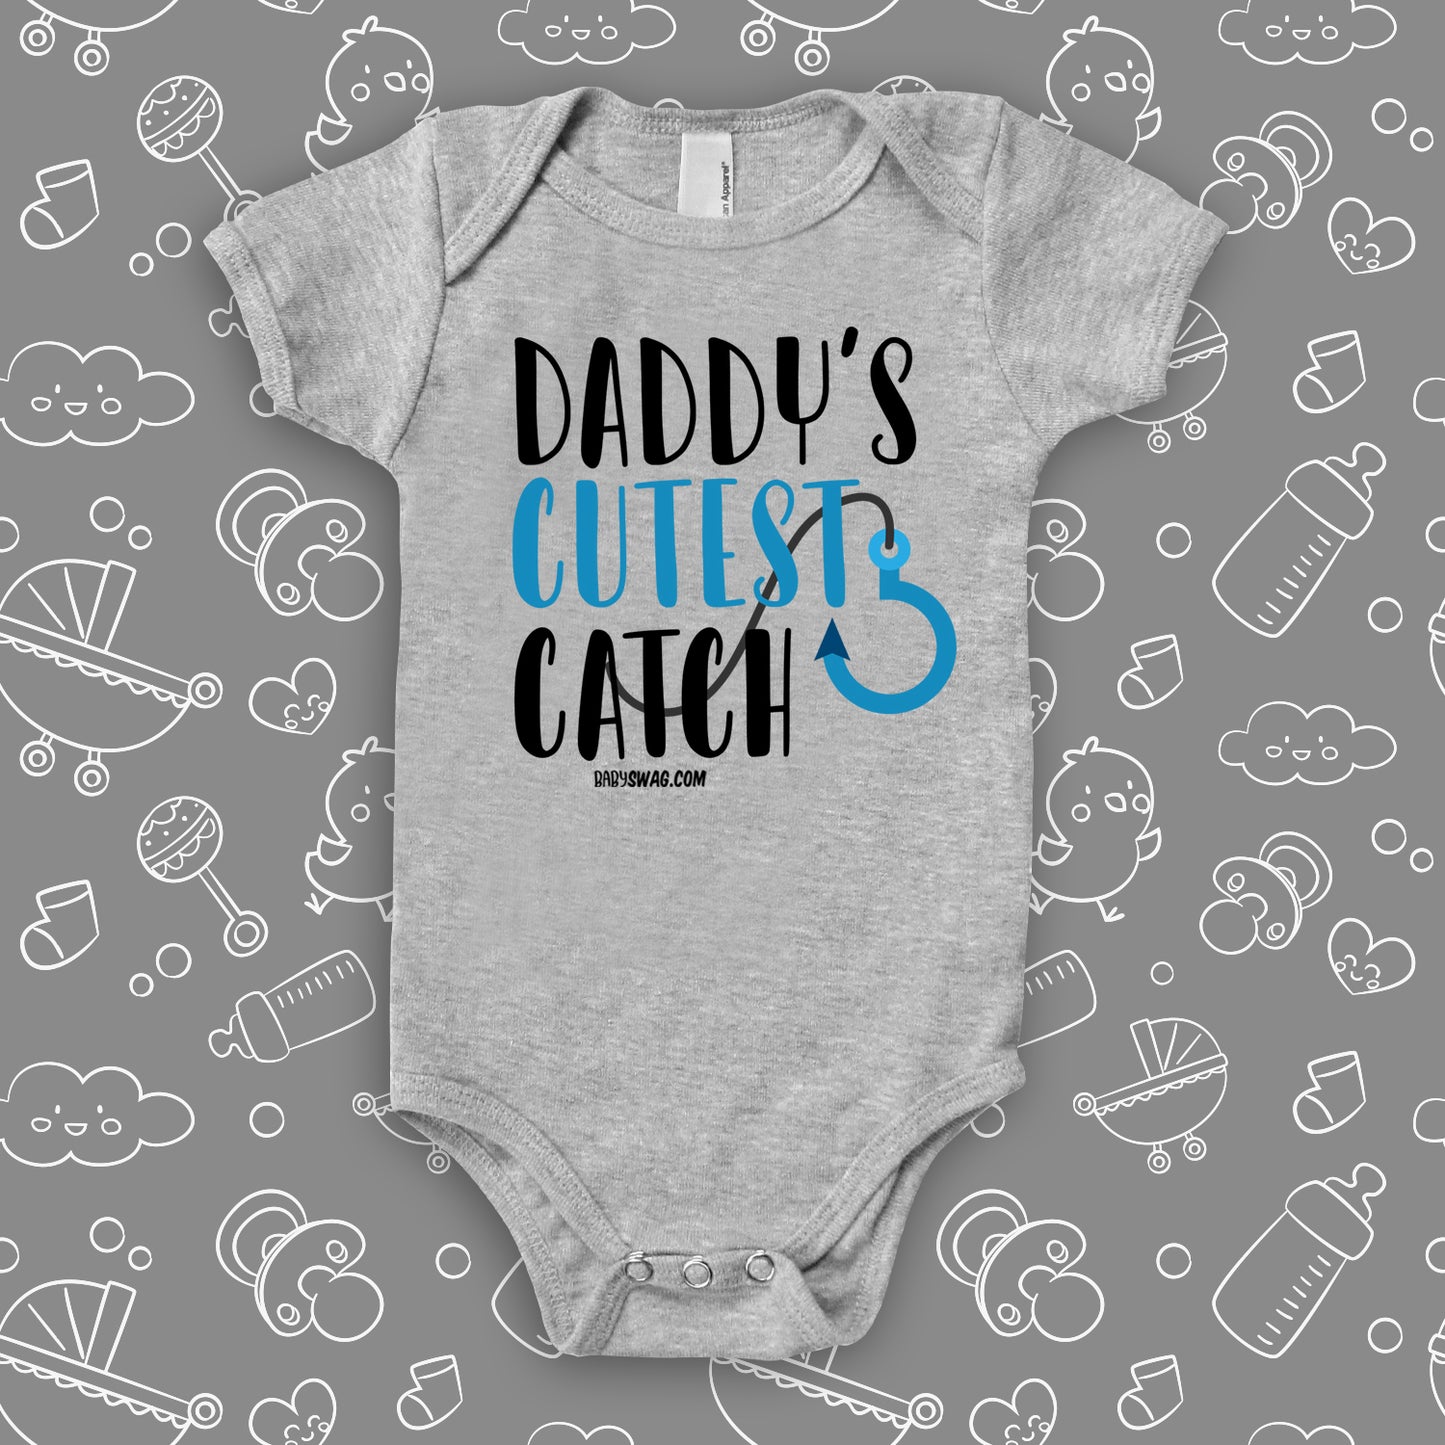 The "Daddy's Cutest Catch" cute baby onesies in grey. 